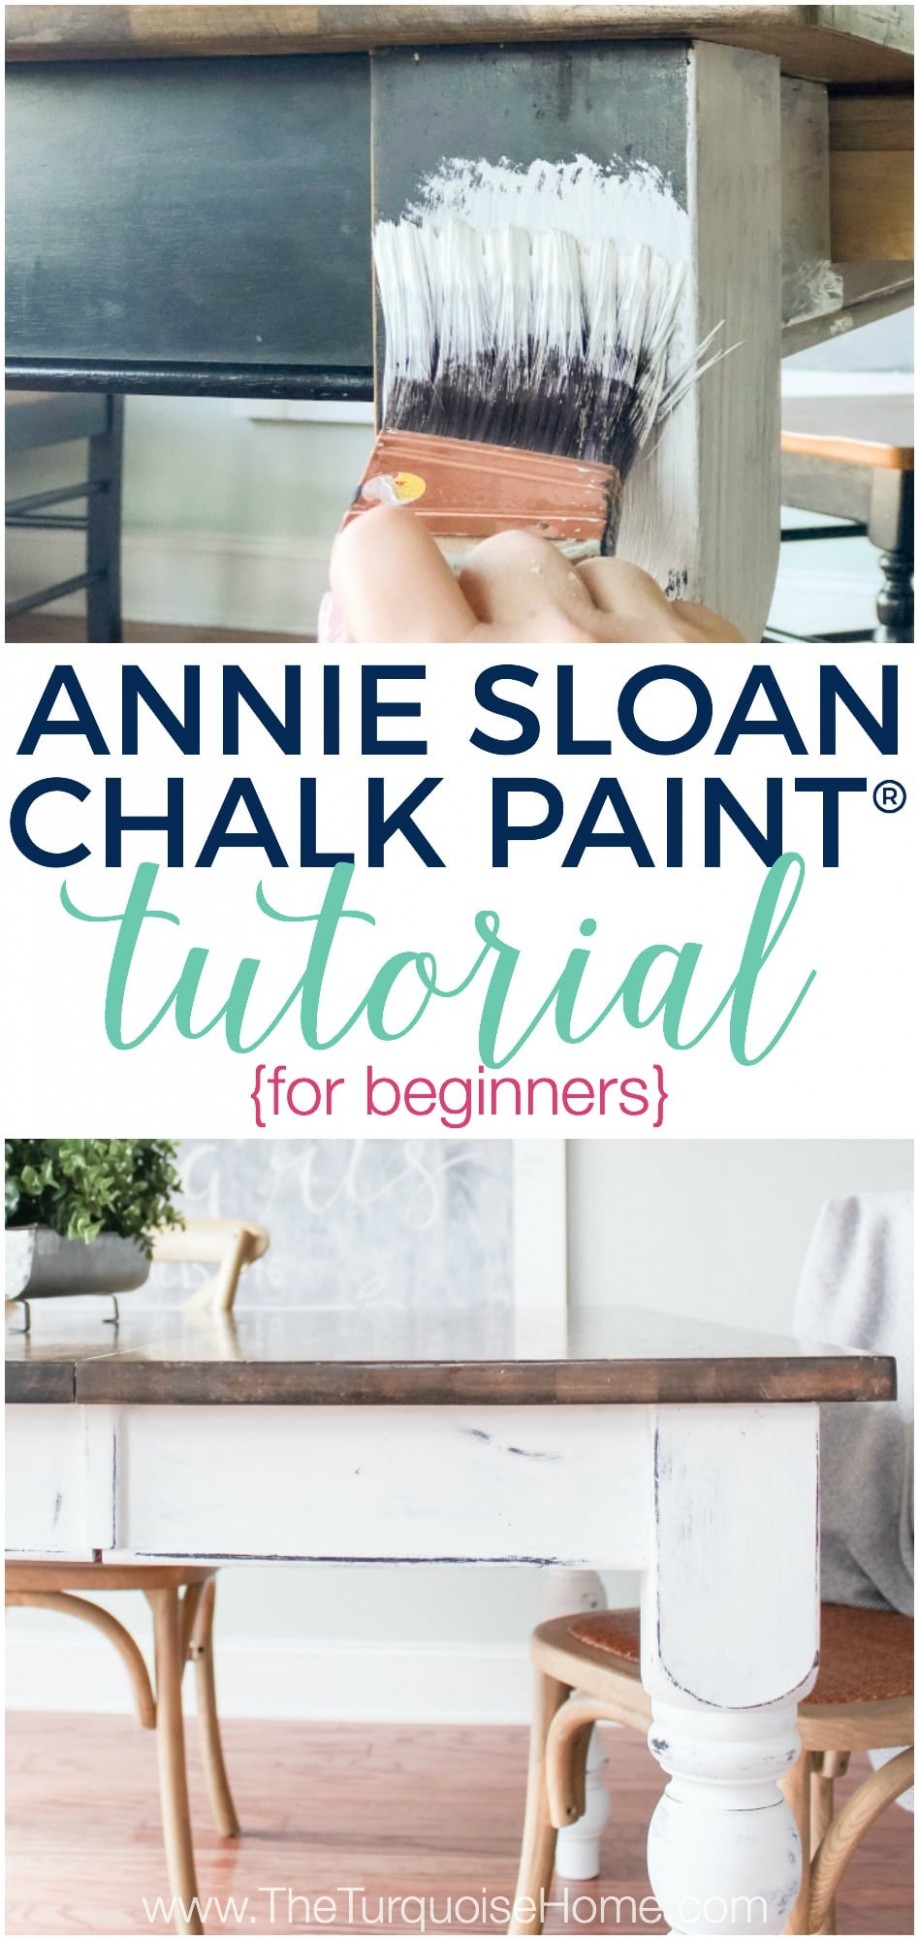 How To Use Annie Sloan Chalk Paint (perfect For Beginners!) Annie Sloan Chalk Paint Dry Time Between Coats